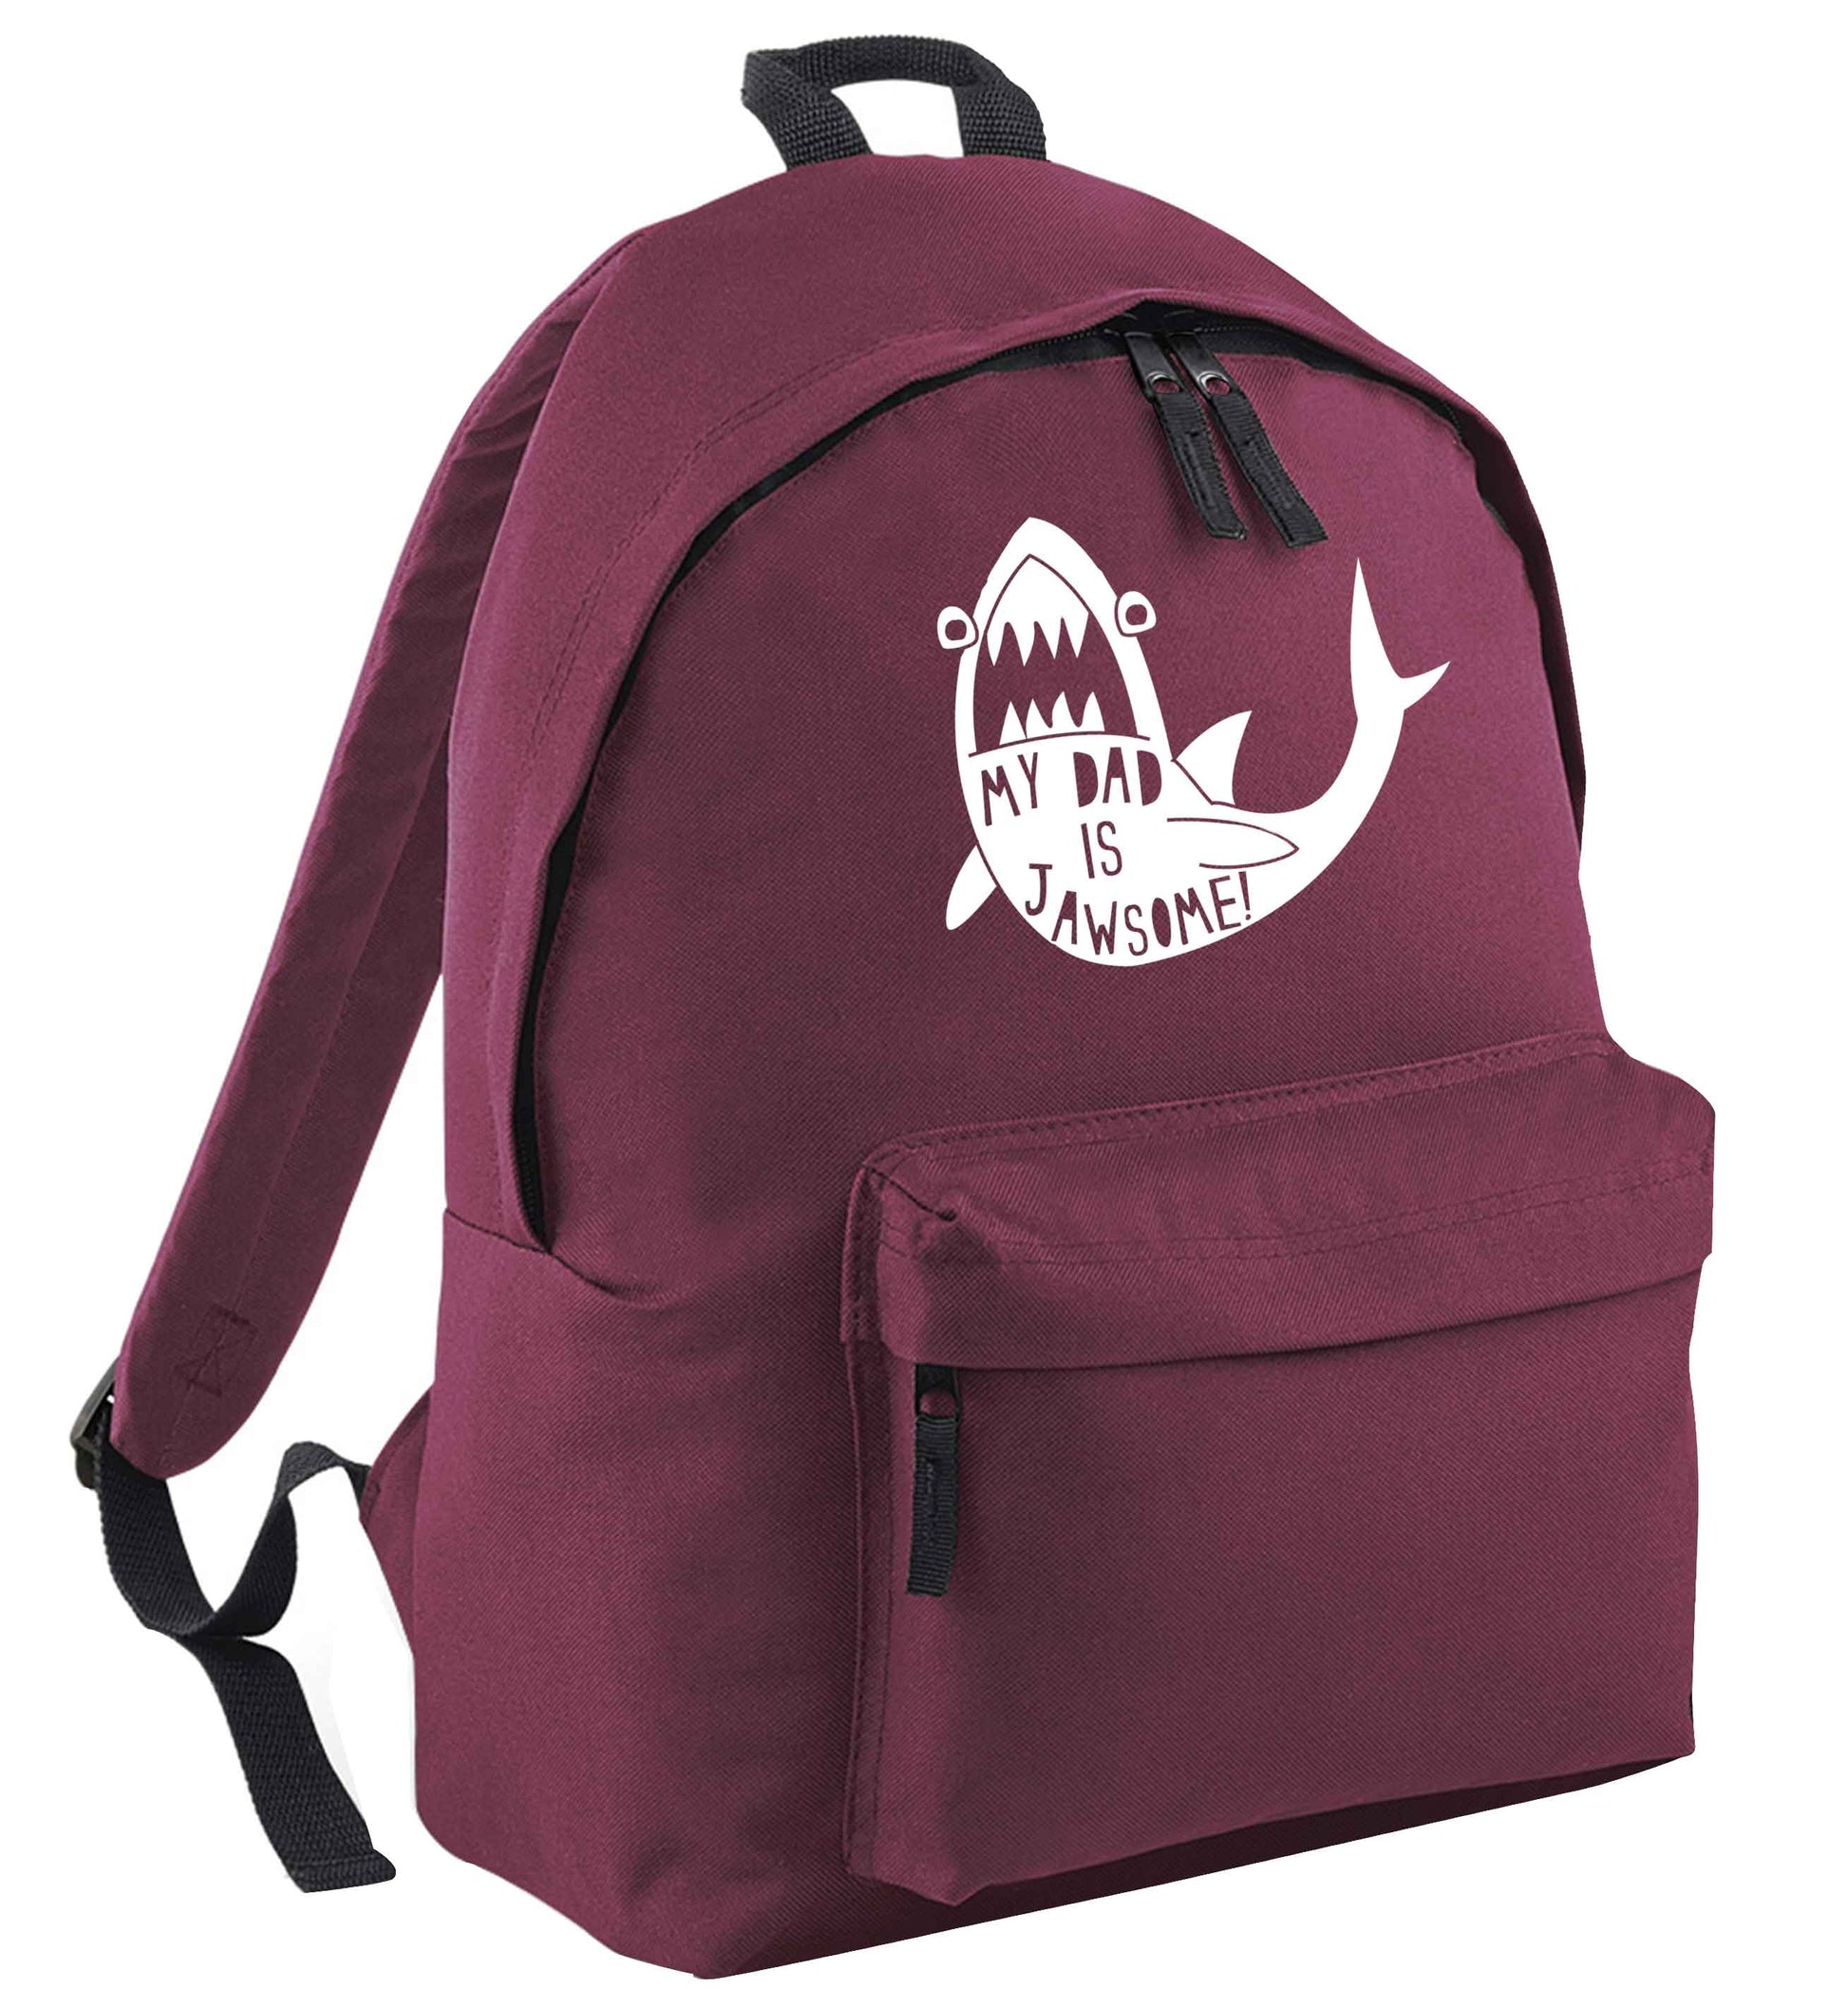 My Dad is jawsome maroon adults backpack